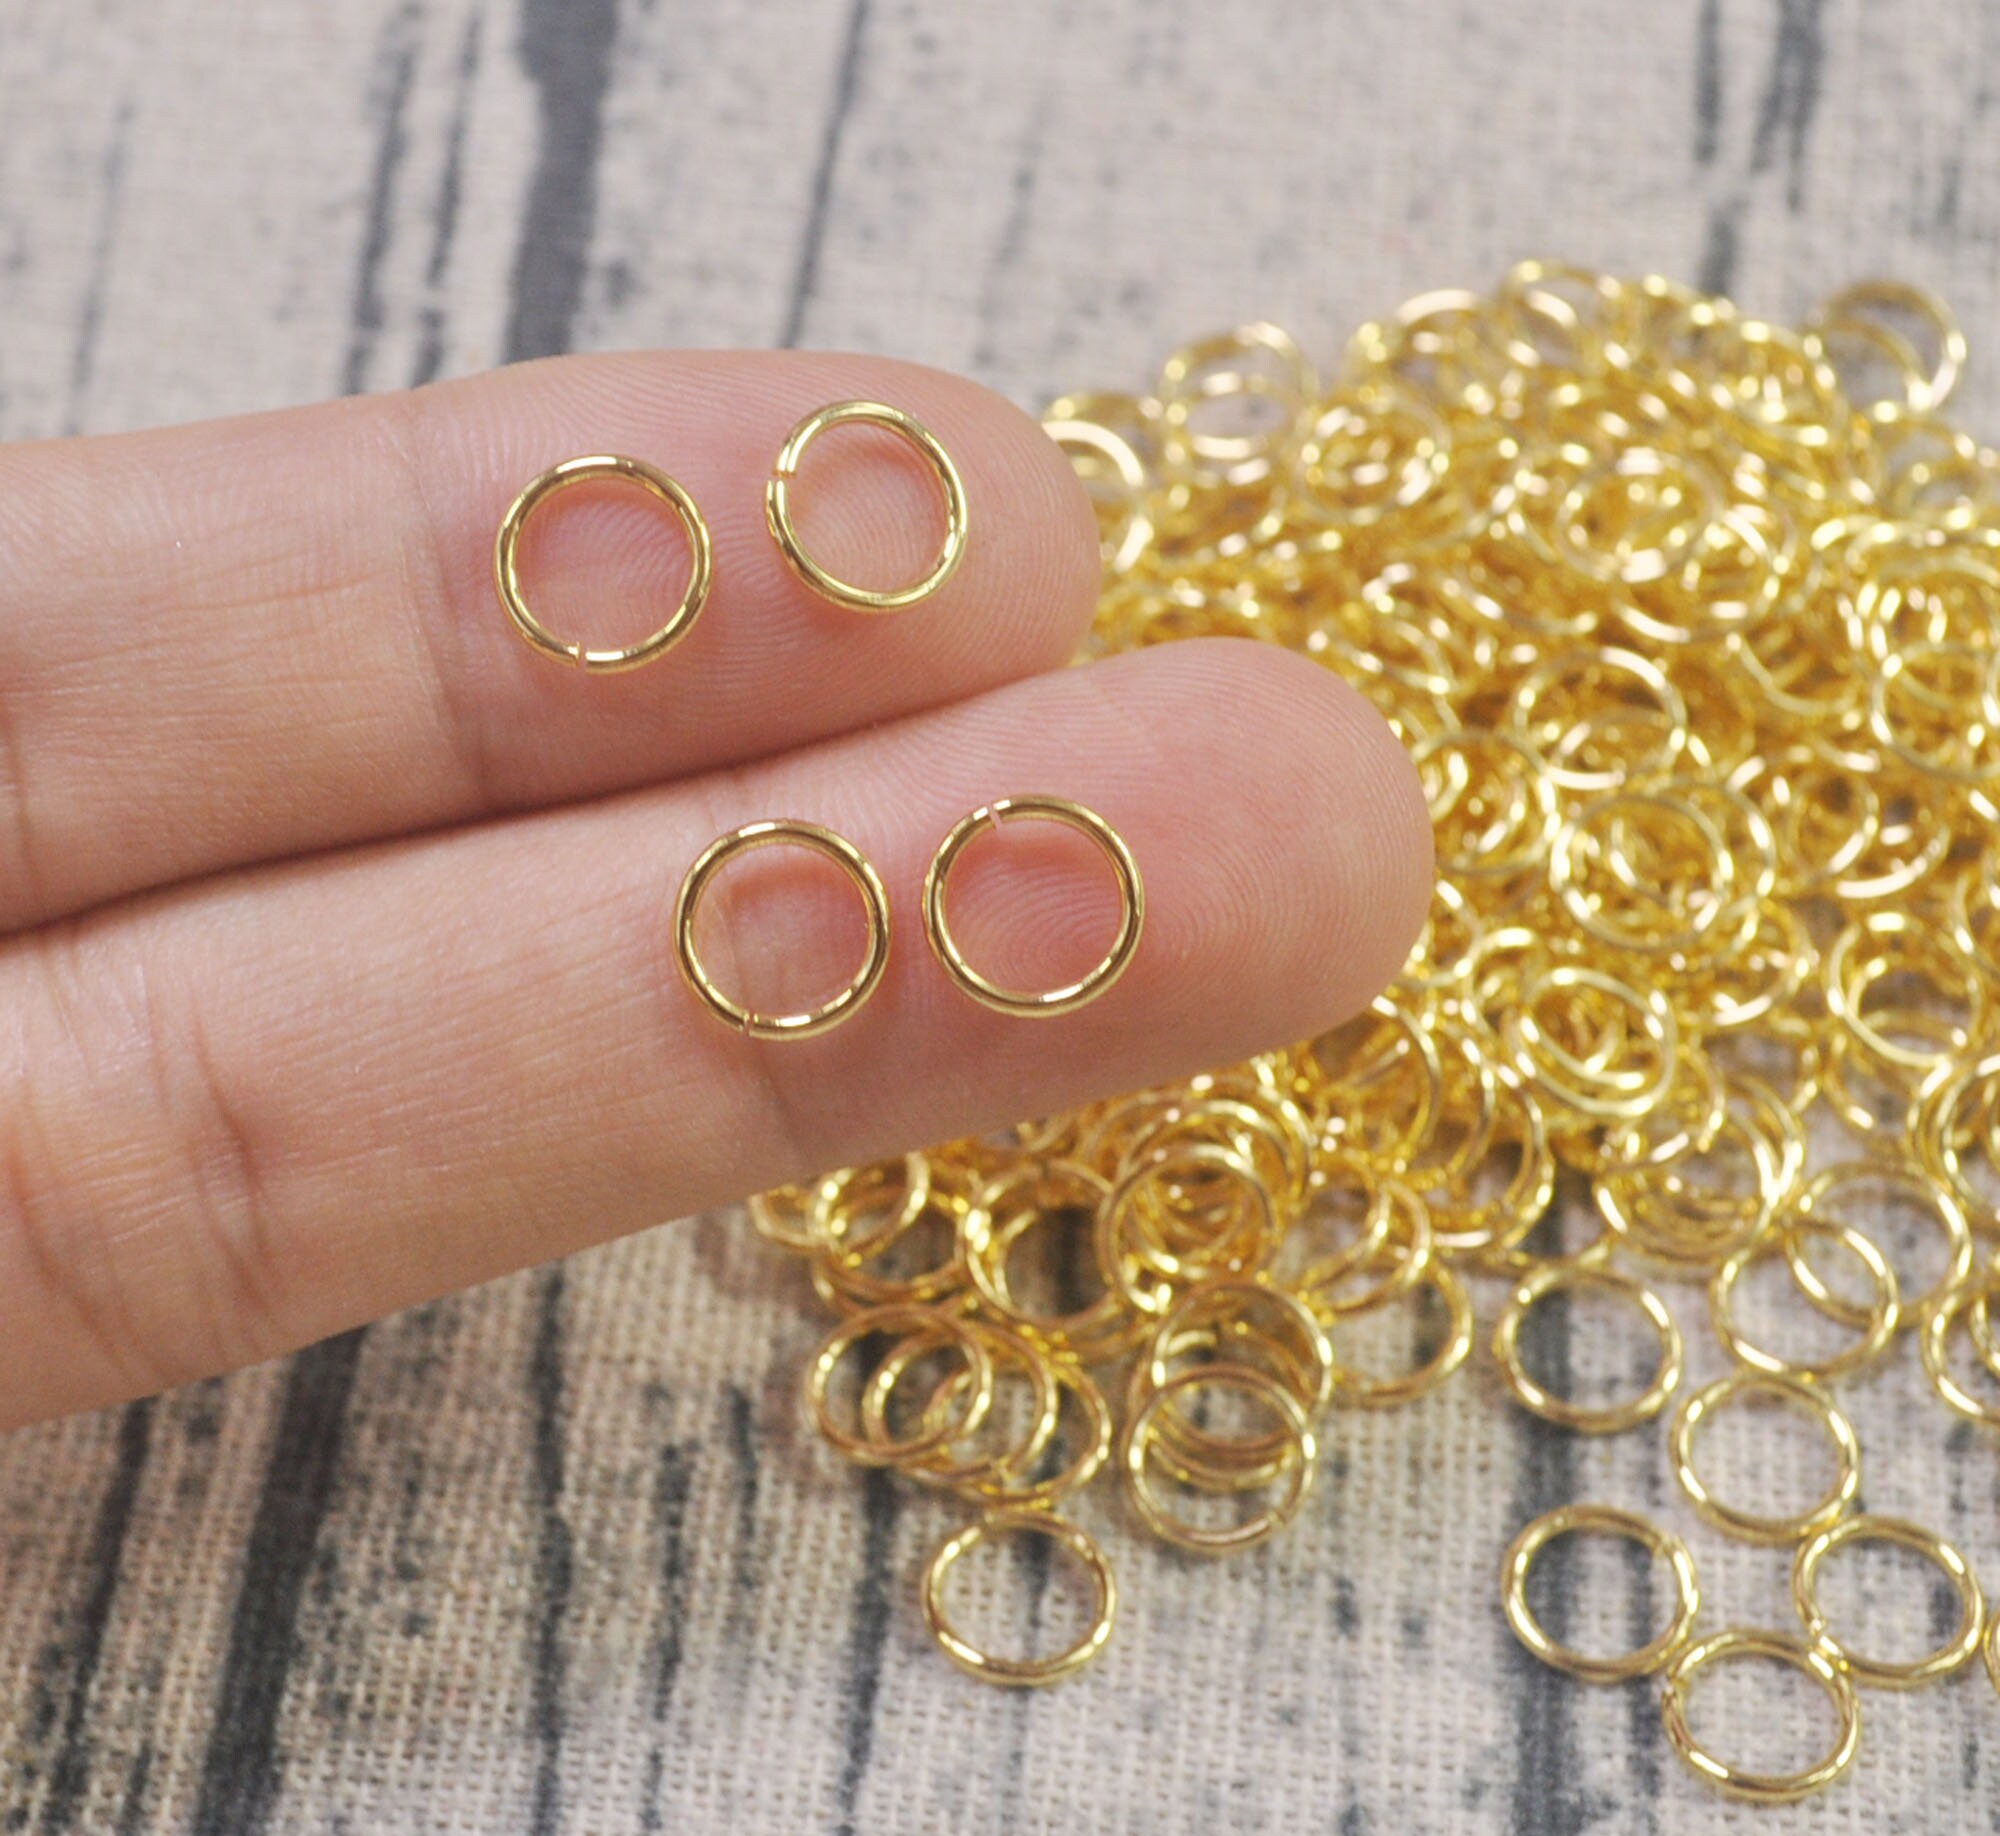 Textured Jump ring,Iron Open Jump rings,100Pcs 12mm Gold Plated Jump Rings